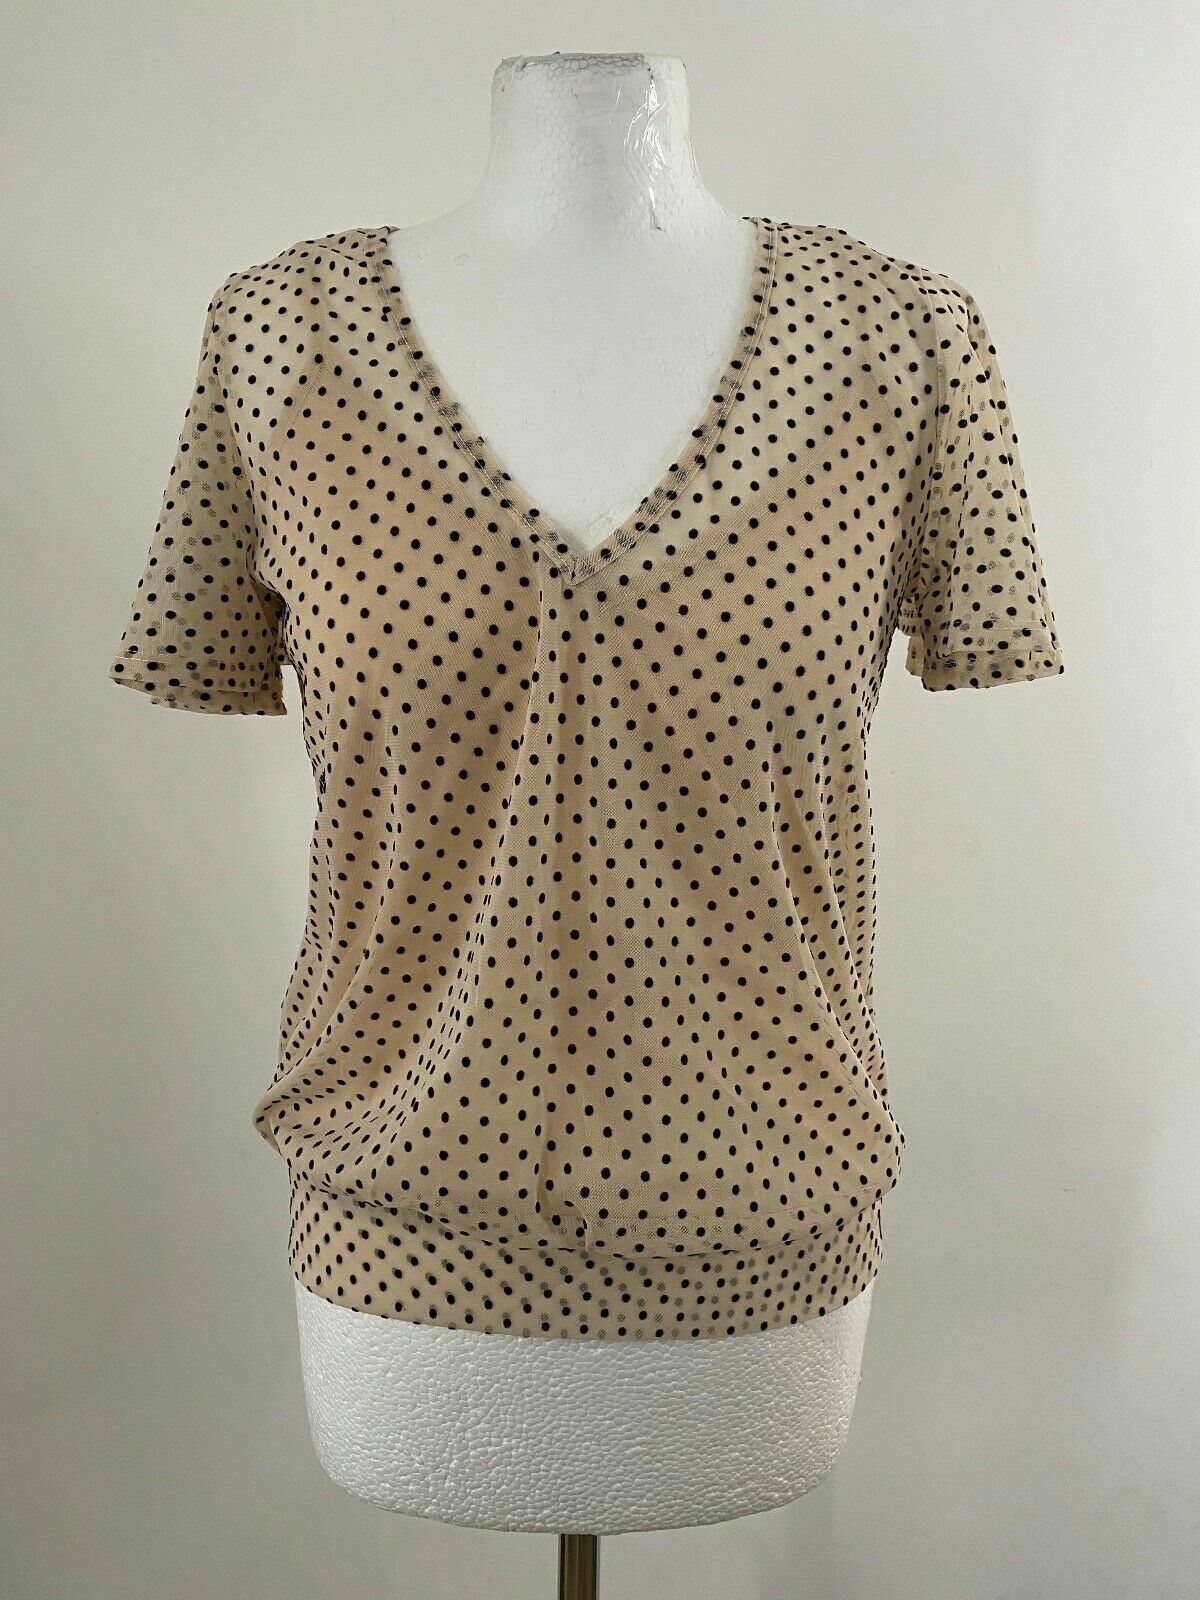 Buff Clothing Polka Dot Layered Mesh Top with Vest Size 10